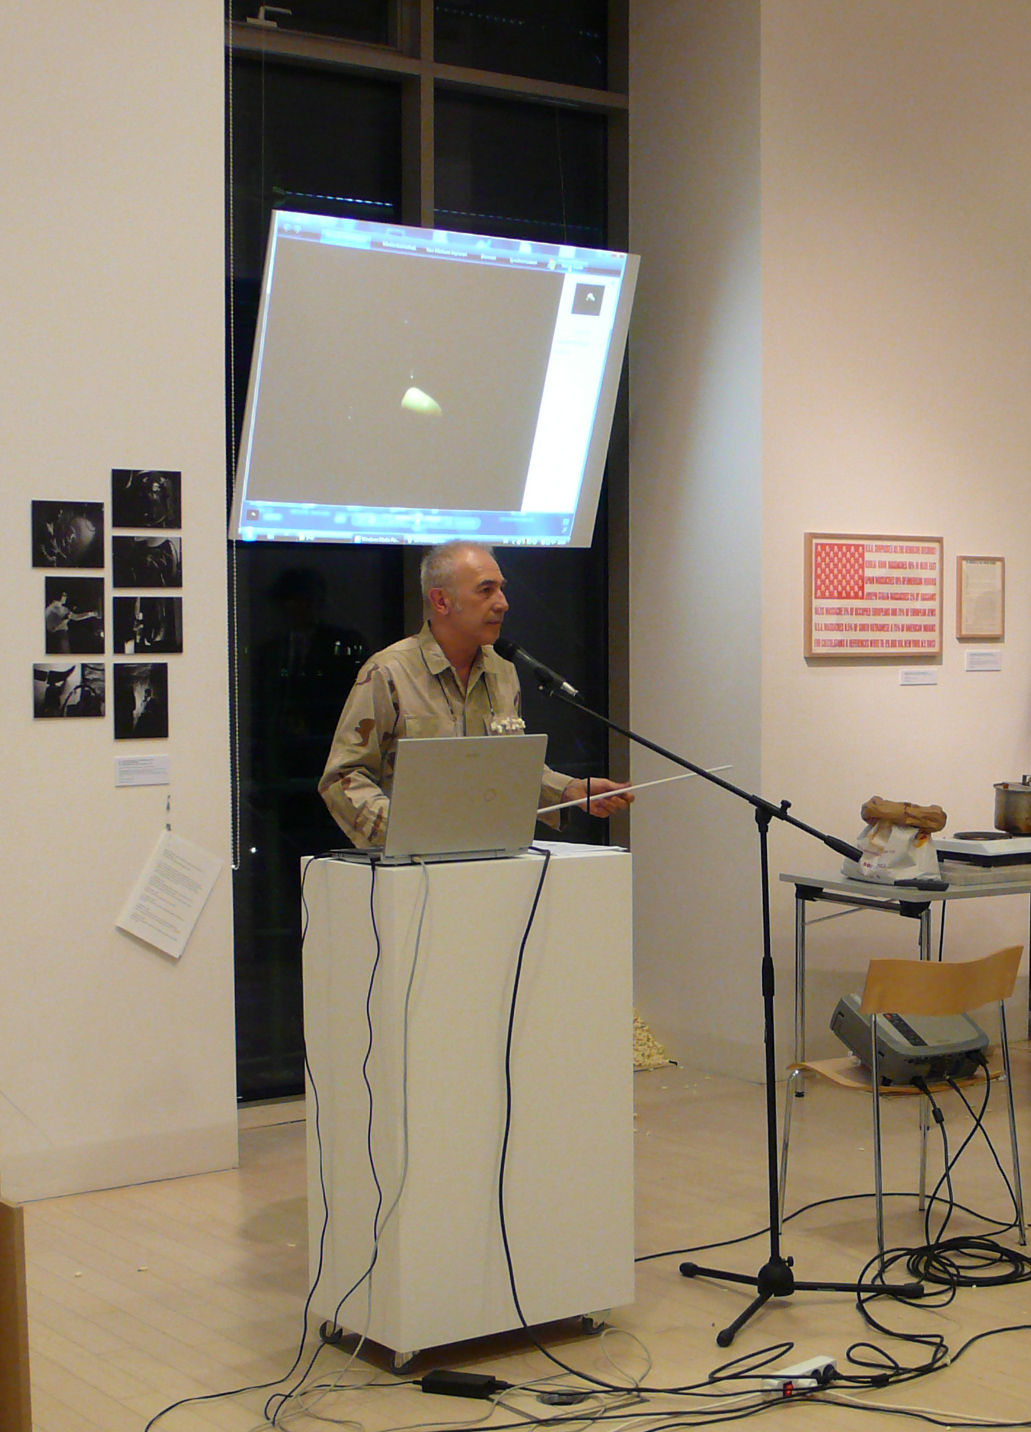 Lecture of Gábor Altorjay in the framework of the Fluxus East exhibition, Ludwig Museum, Budapest, 2008